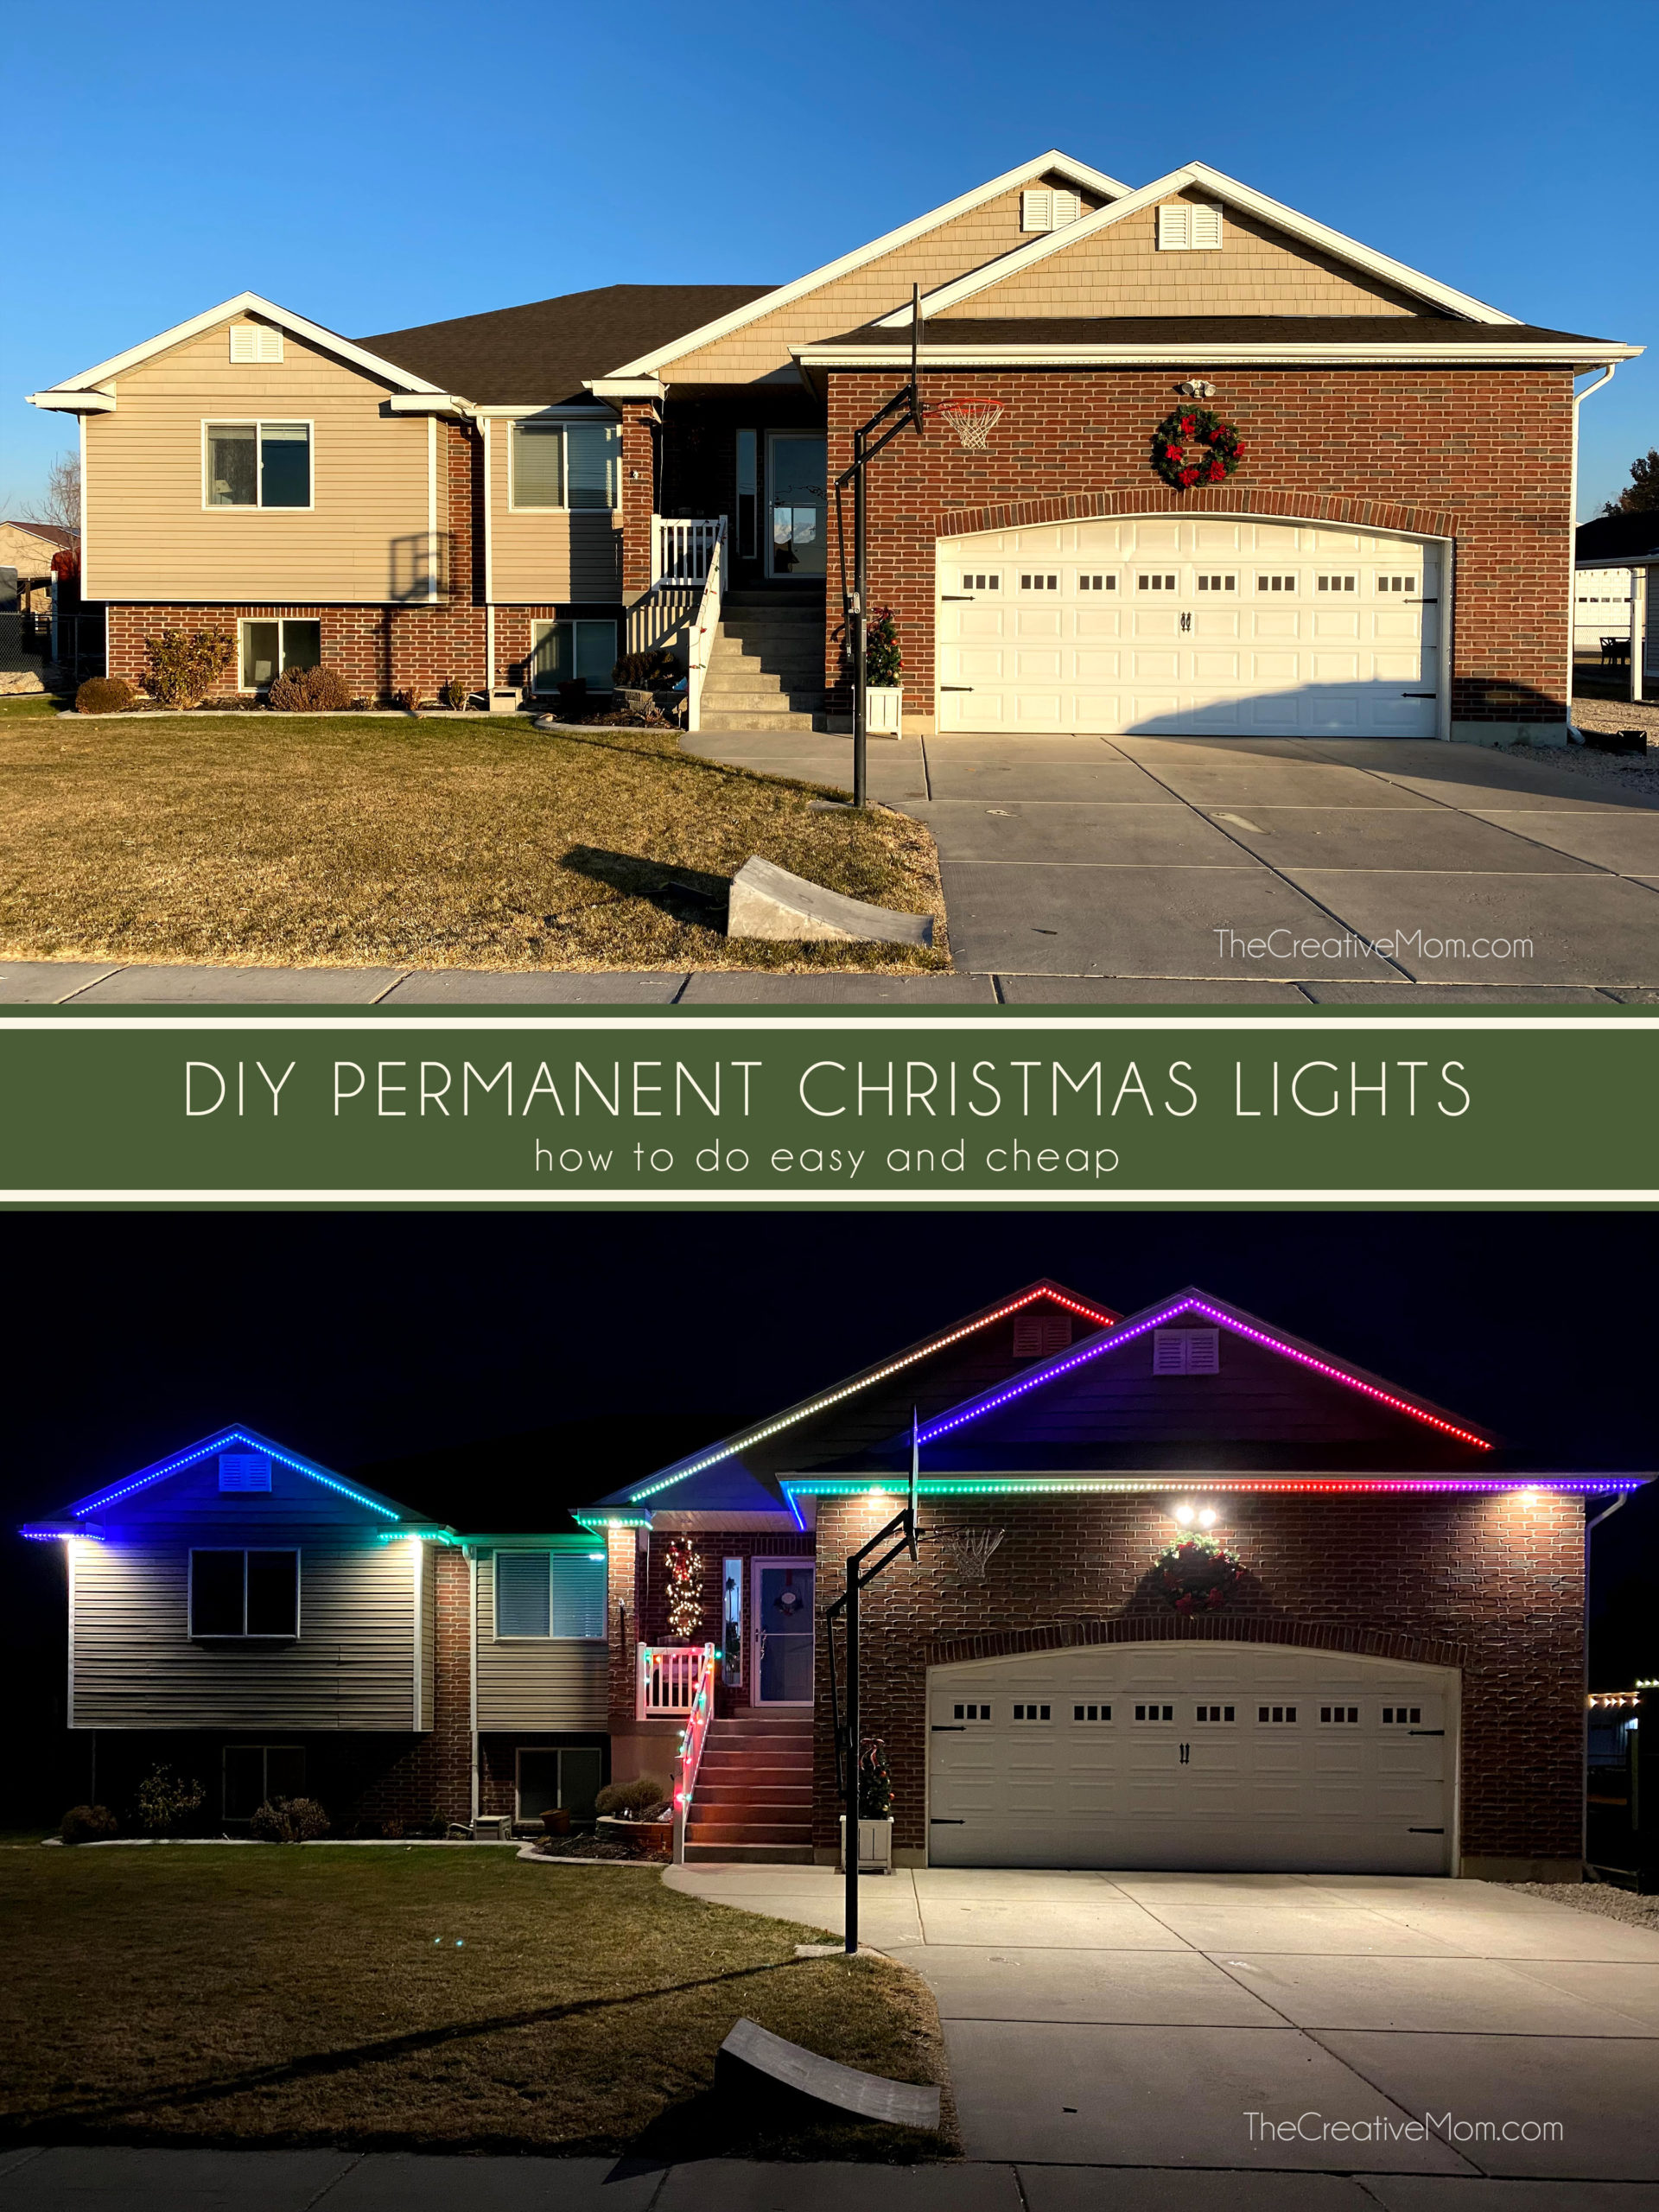 Garage Lighting Ideas: Should You Switch from Traditional Lighting